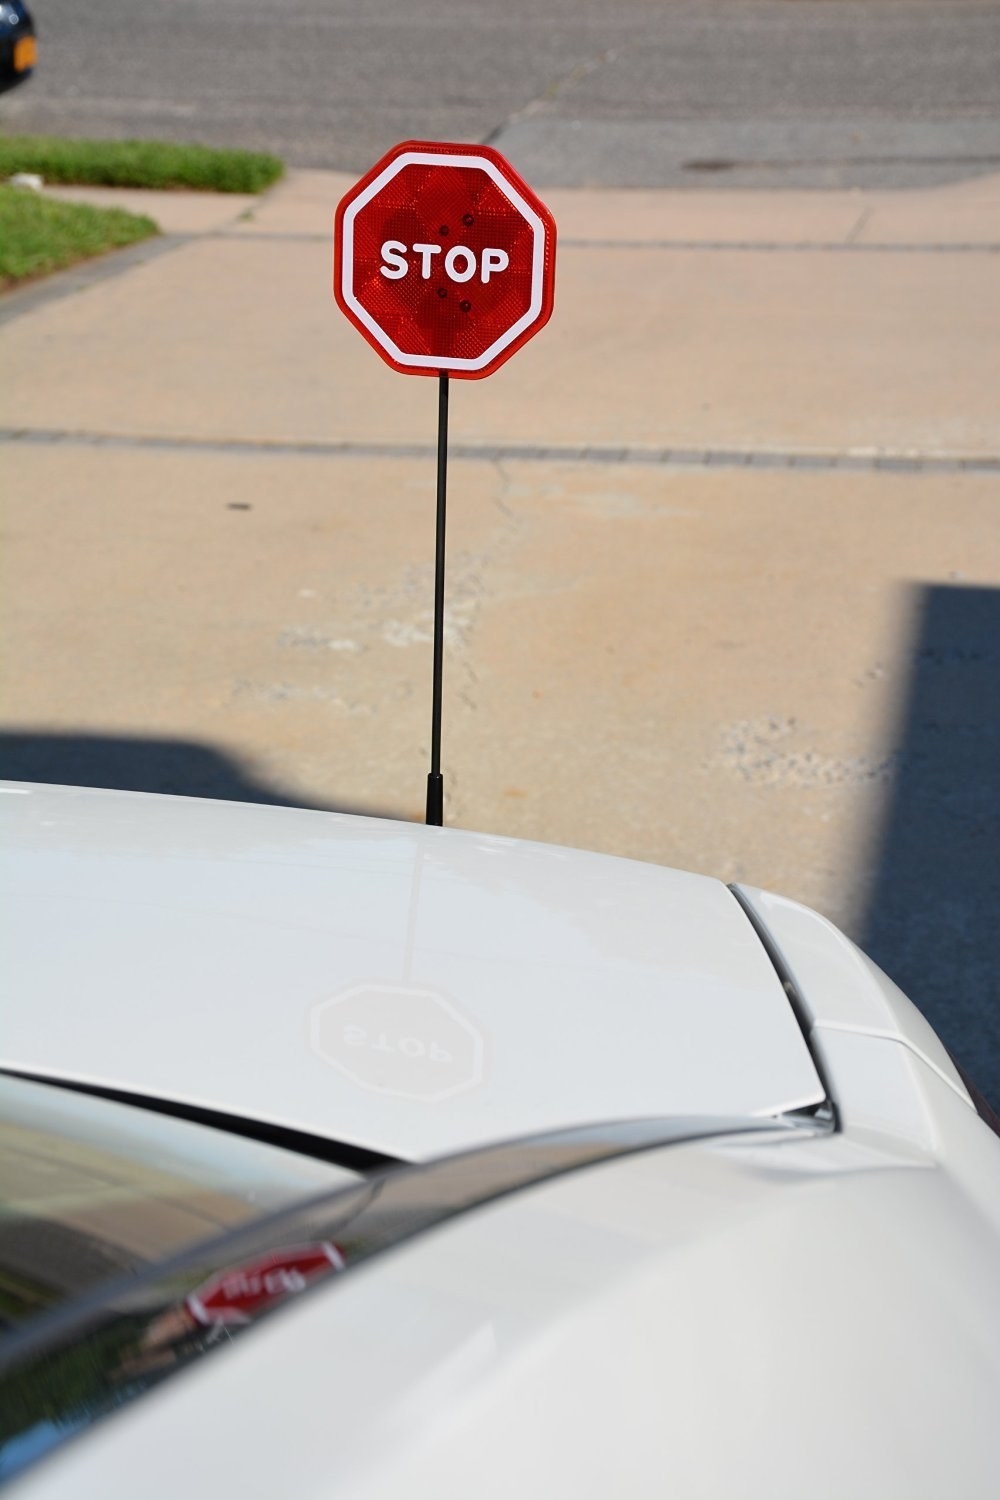 small stop sign